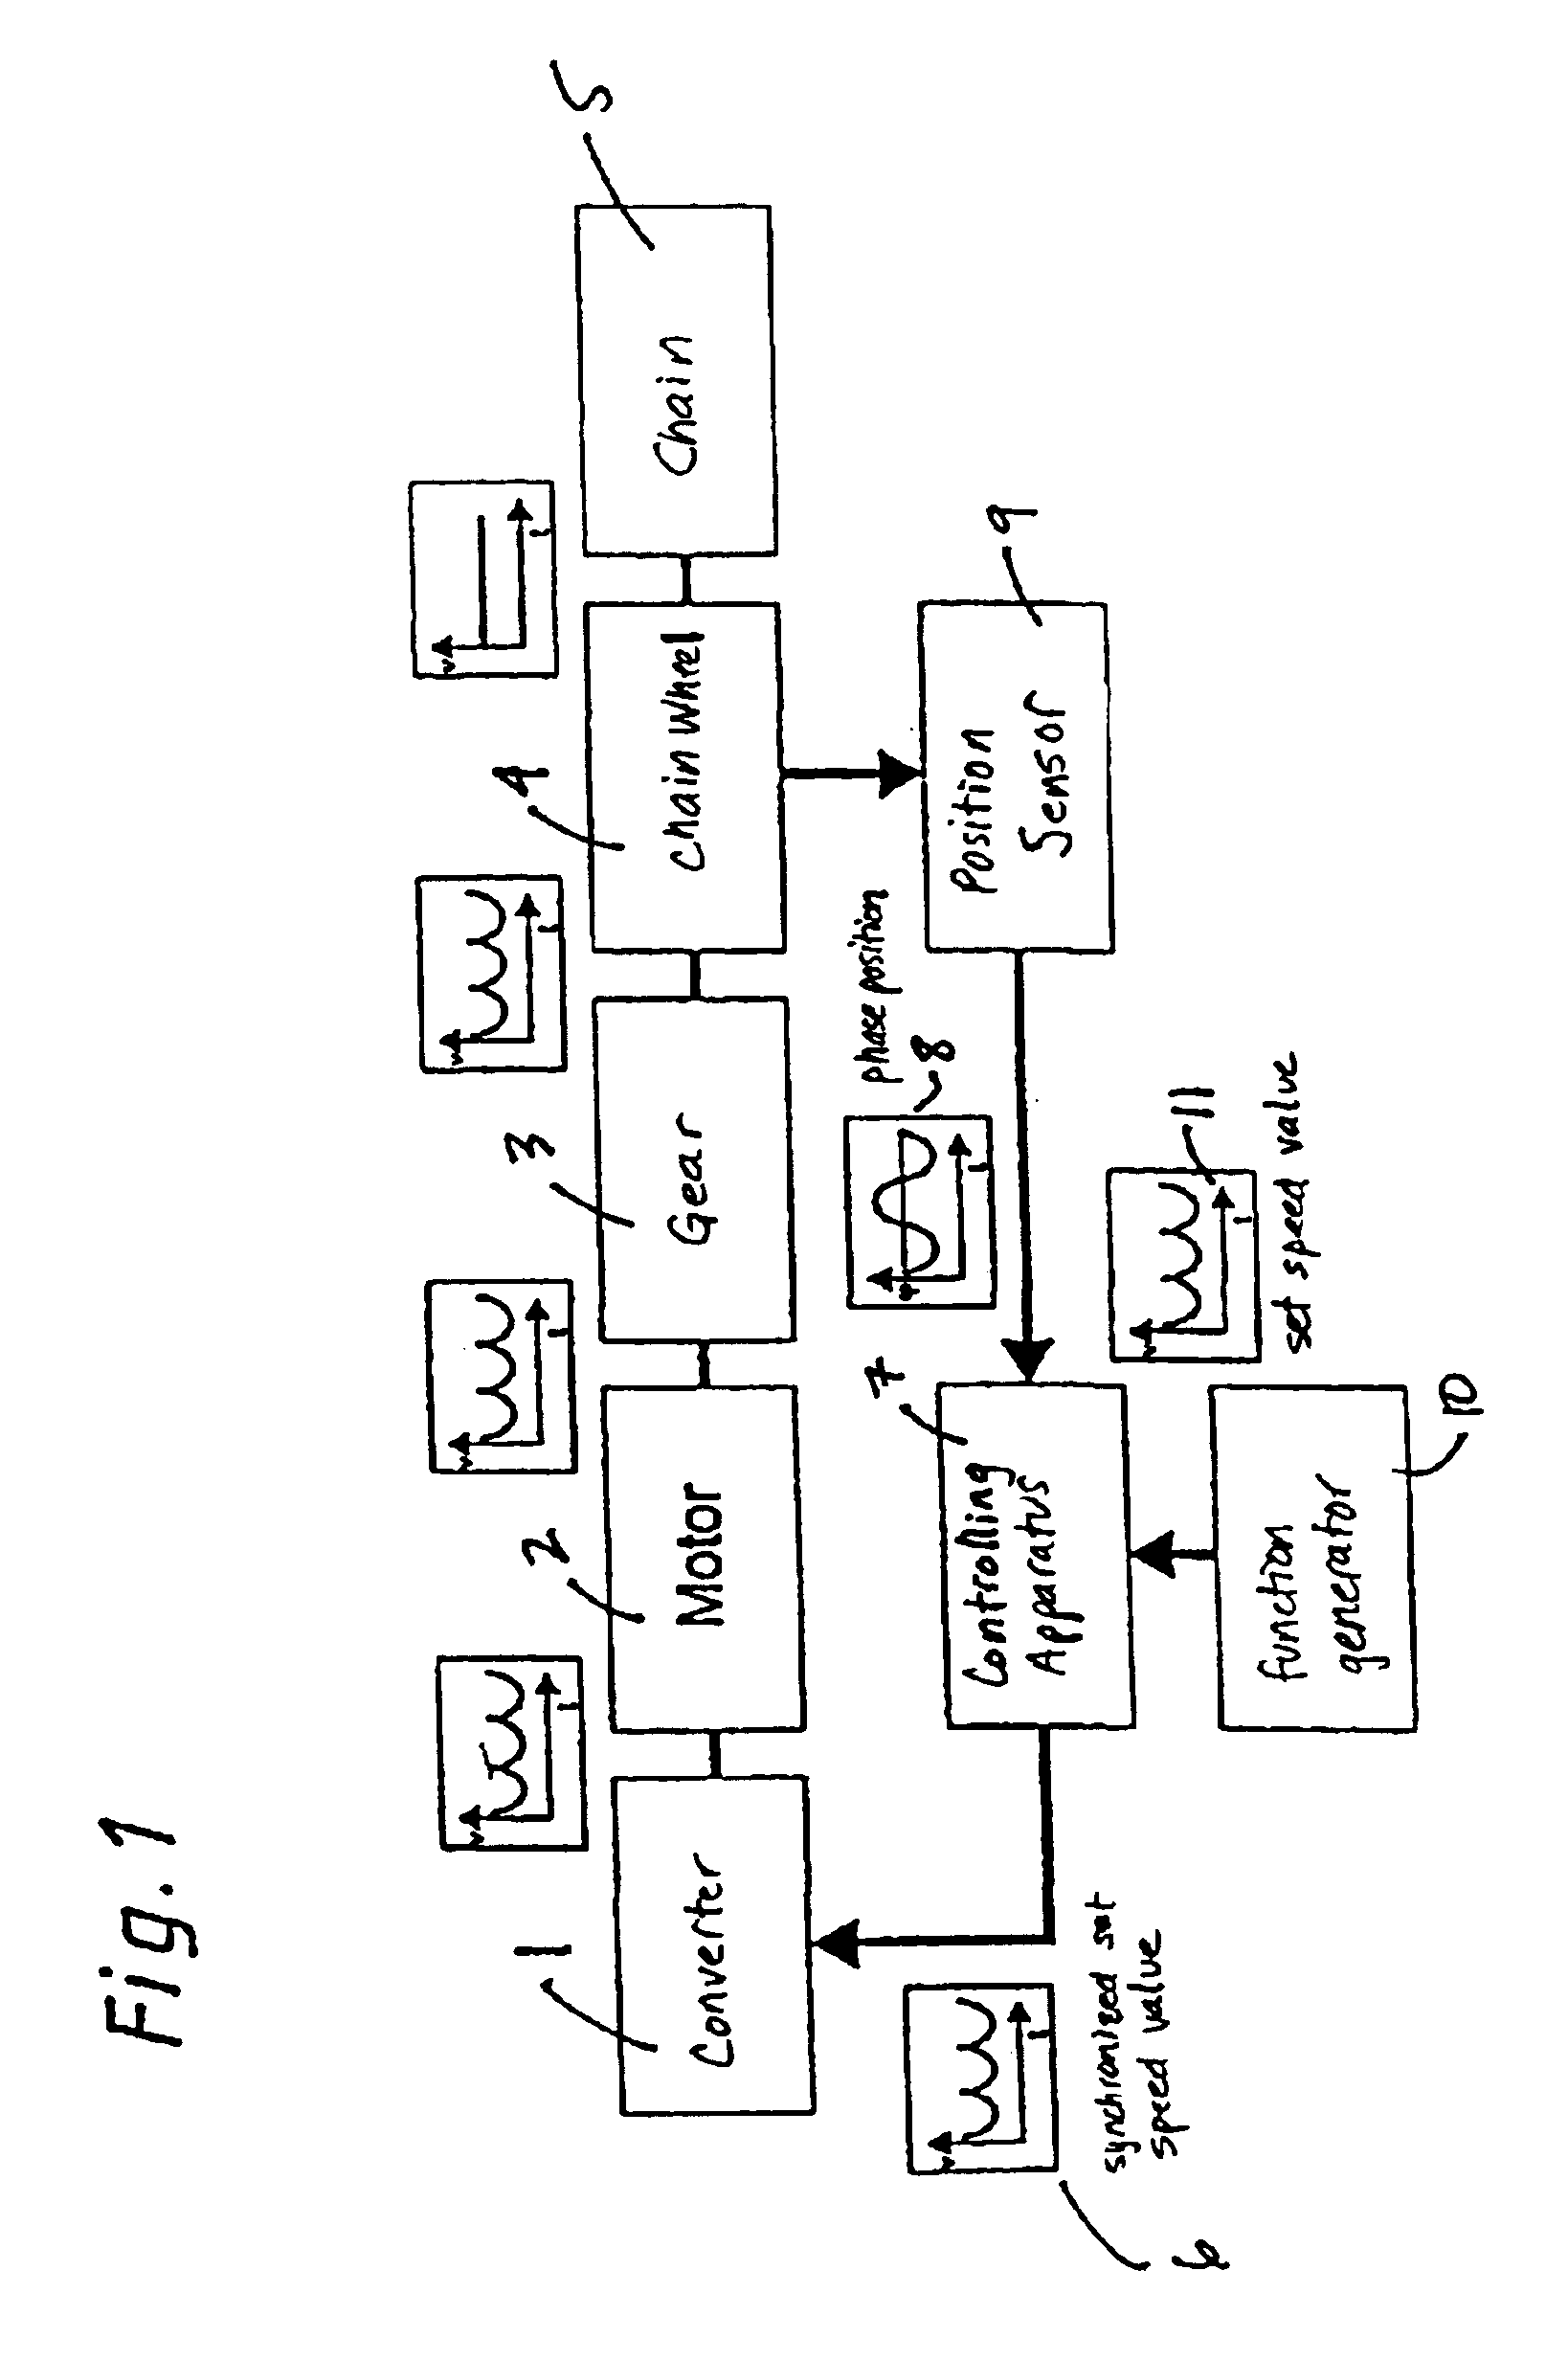 Method and device for reducing the polygon effect in the reversing area of pedestrian conveyor system